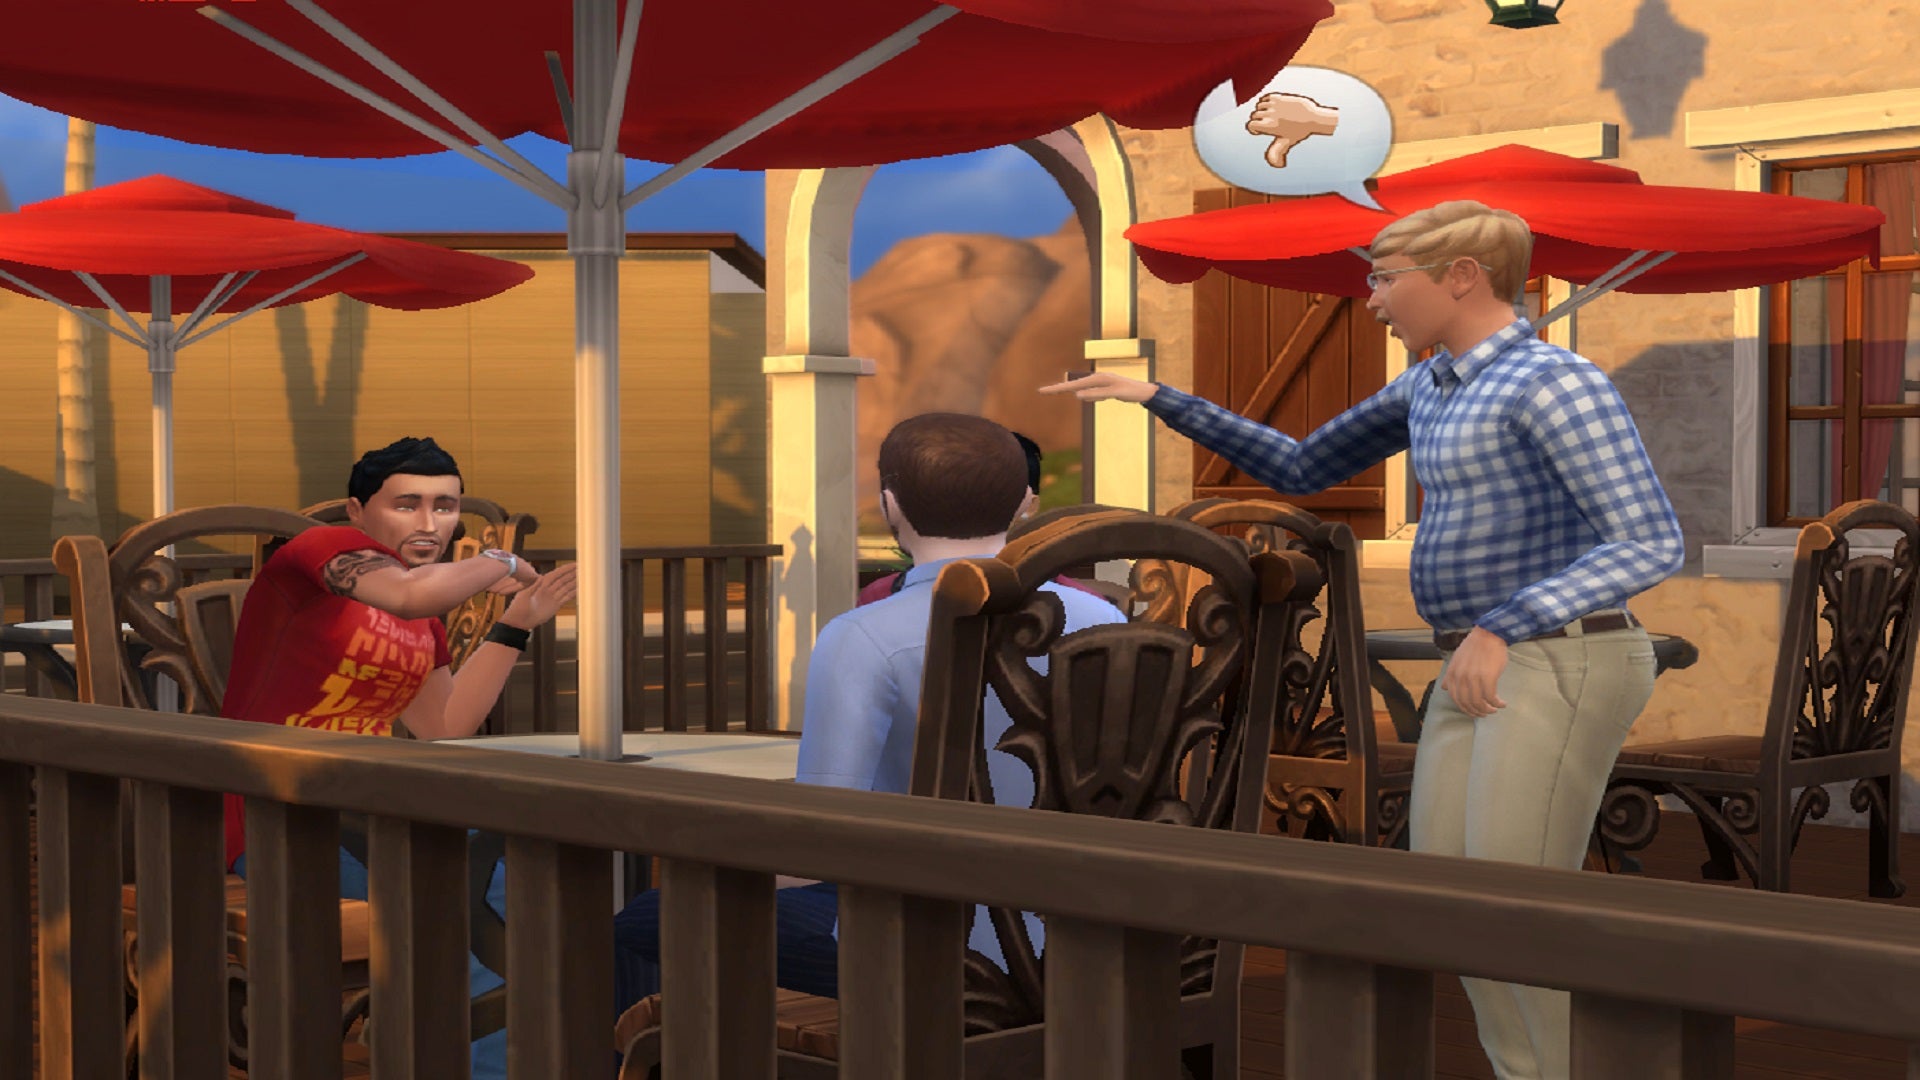 Three Sims at an outdoor café trash talking one another, as represented by thumbs-down icons.